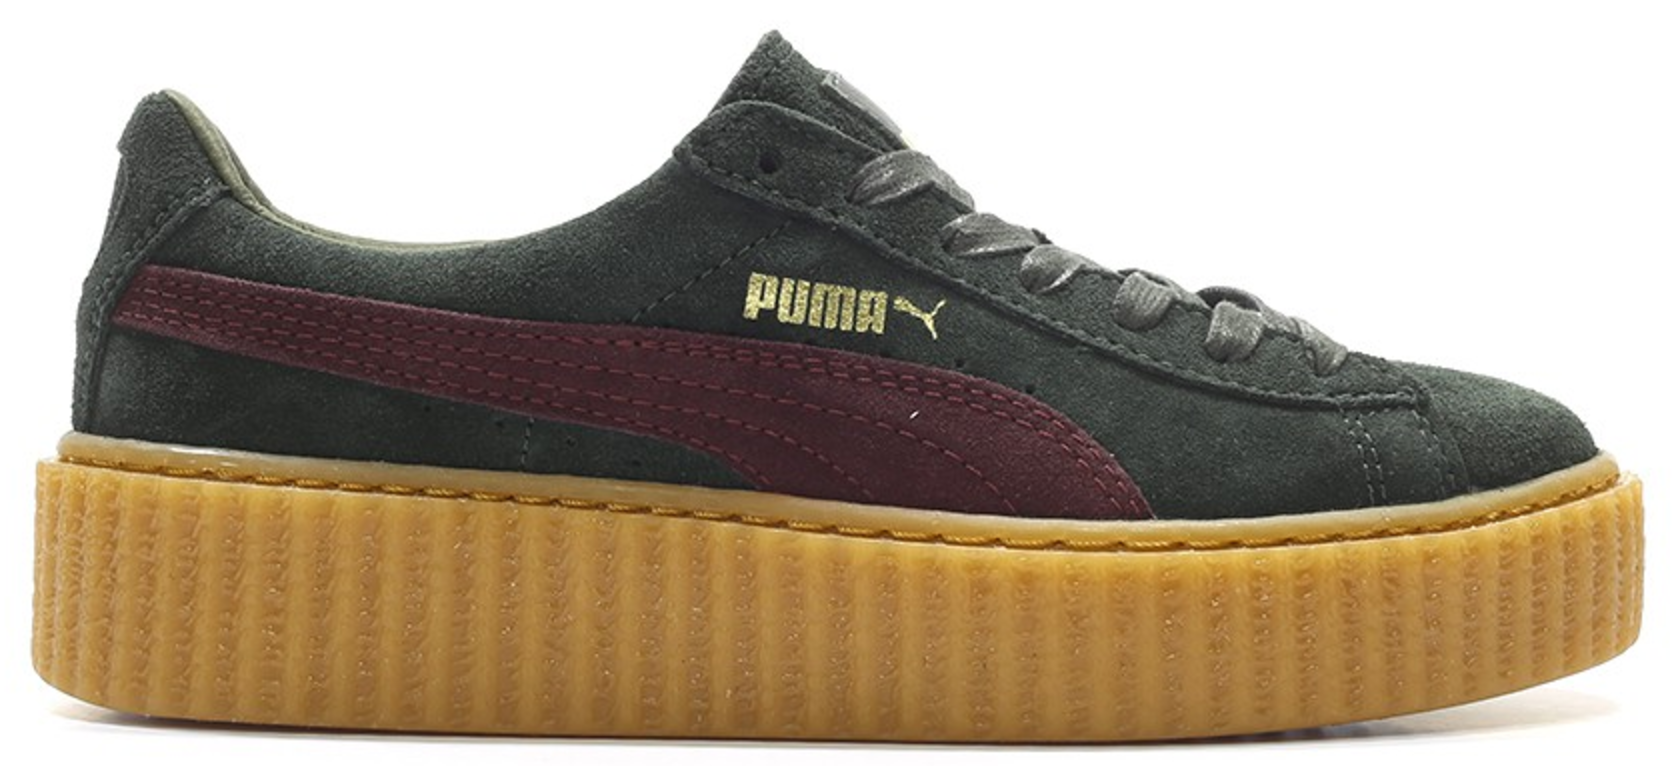 pictures of rihanna puma shoes